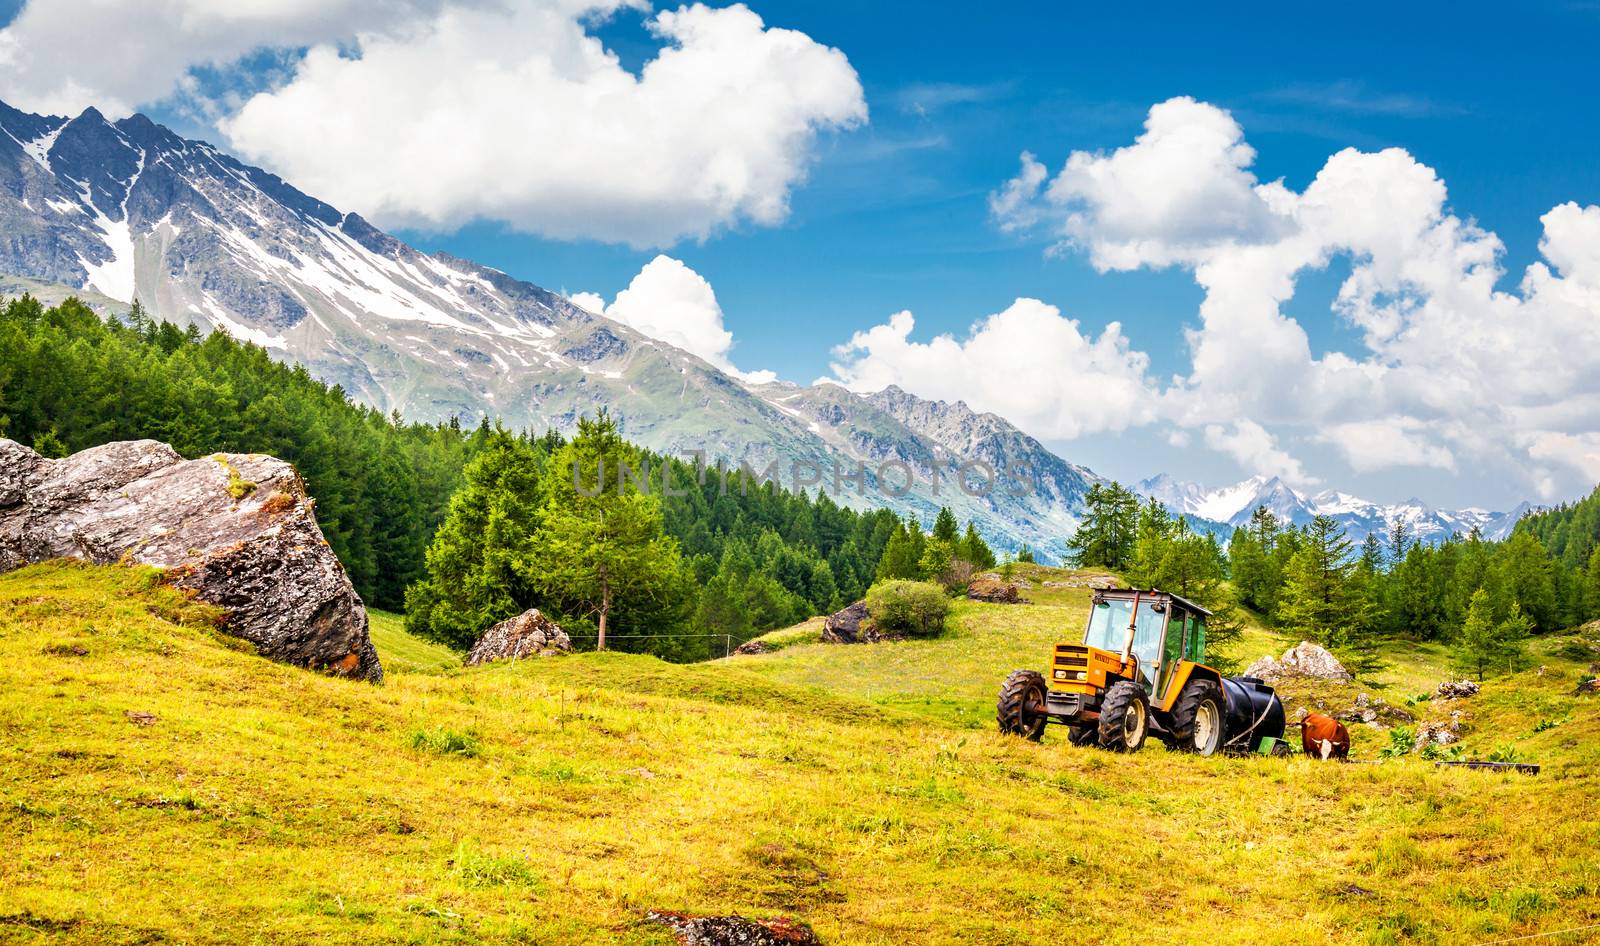 Landscape in the Alps with a tractor, a cow and mountains in background